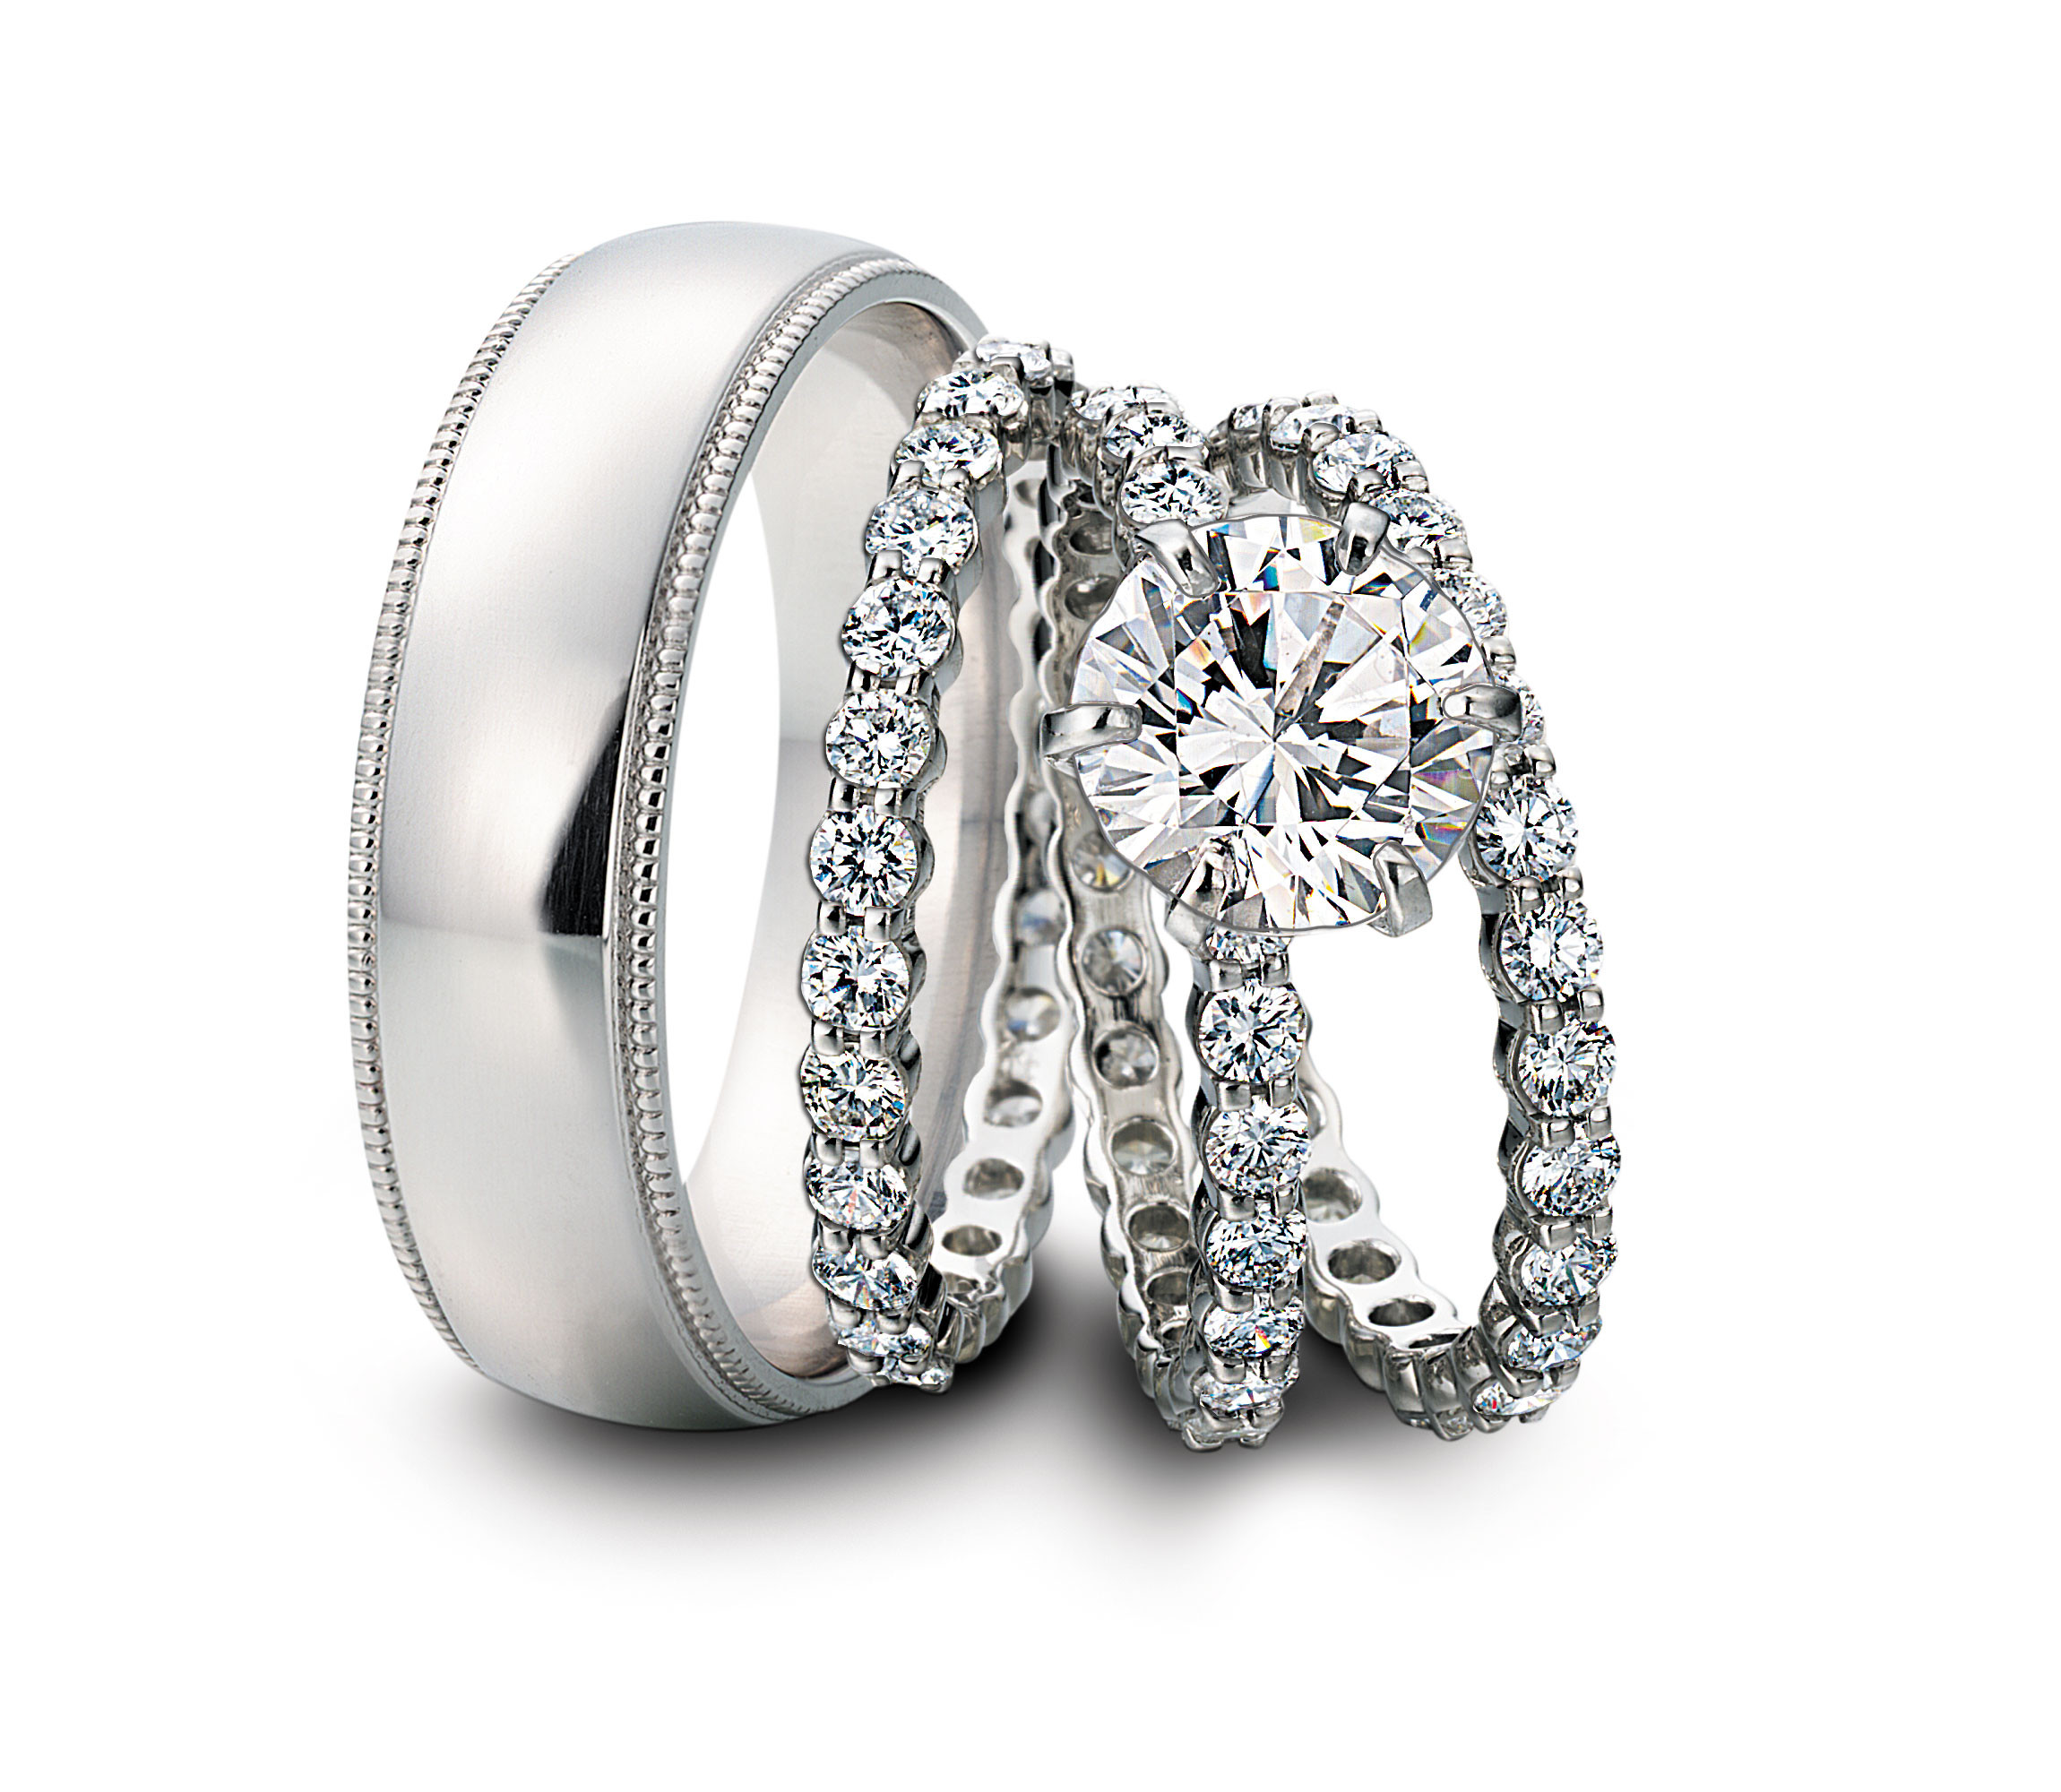 Wedding Band Sets For Him And Her
 Should my wedding band be platinum or gold